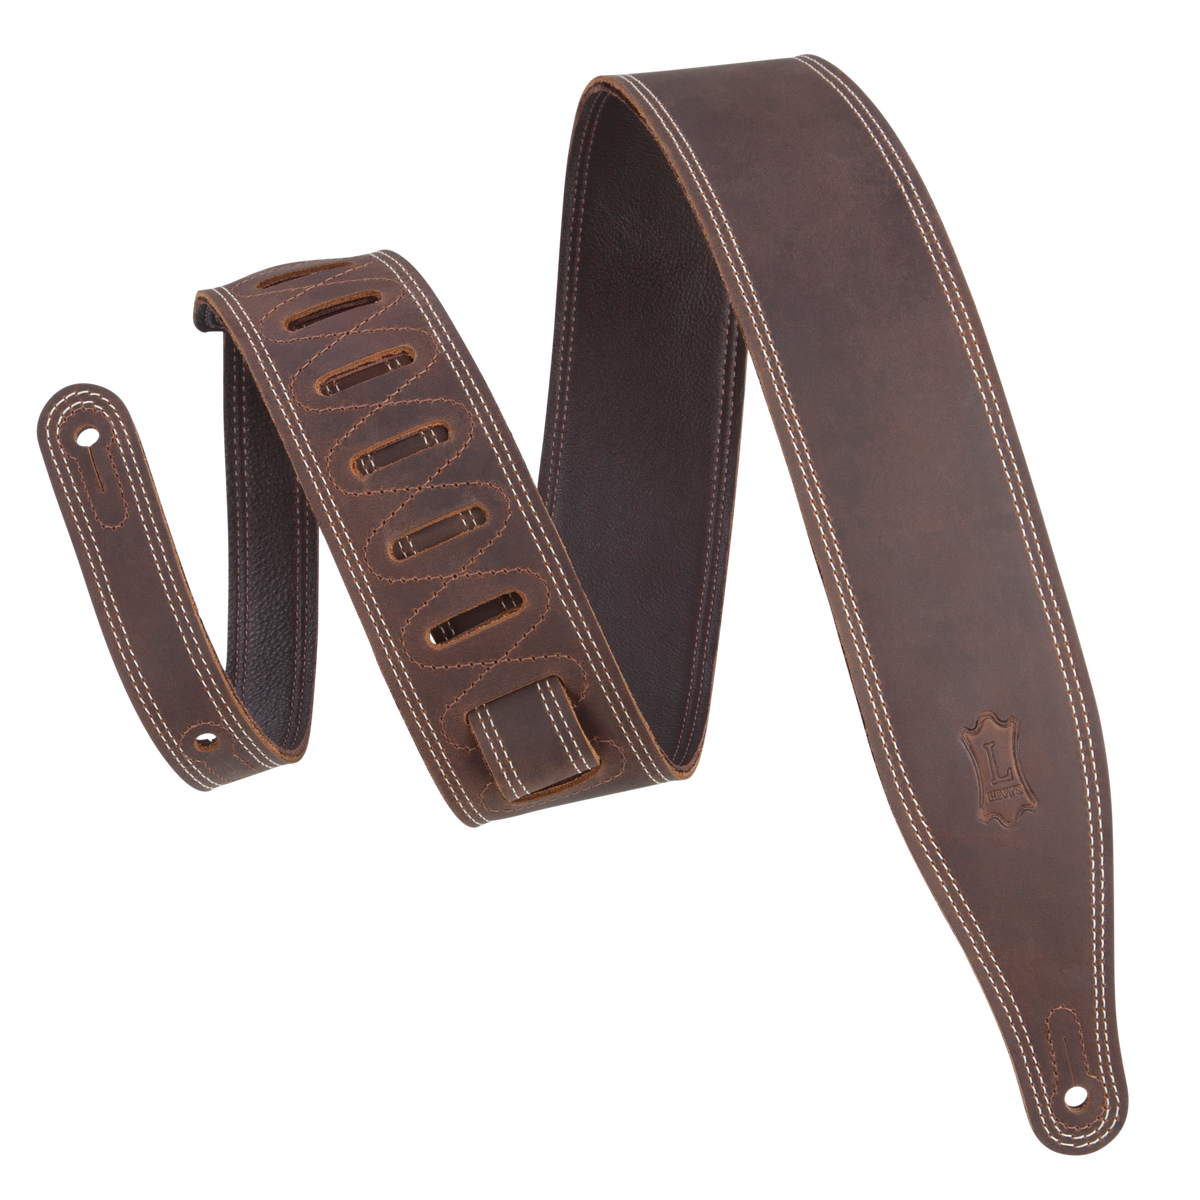 Levy's Levy's 2.5" Wide Garment Leather Guitar Strap - Dark Brown